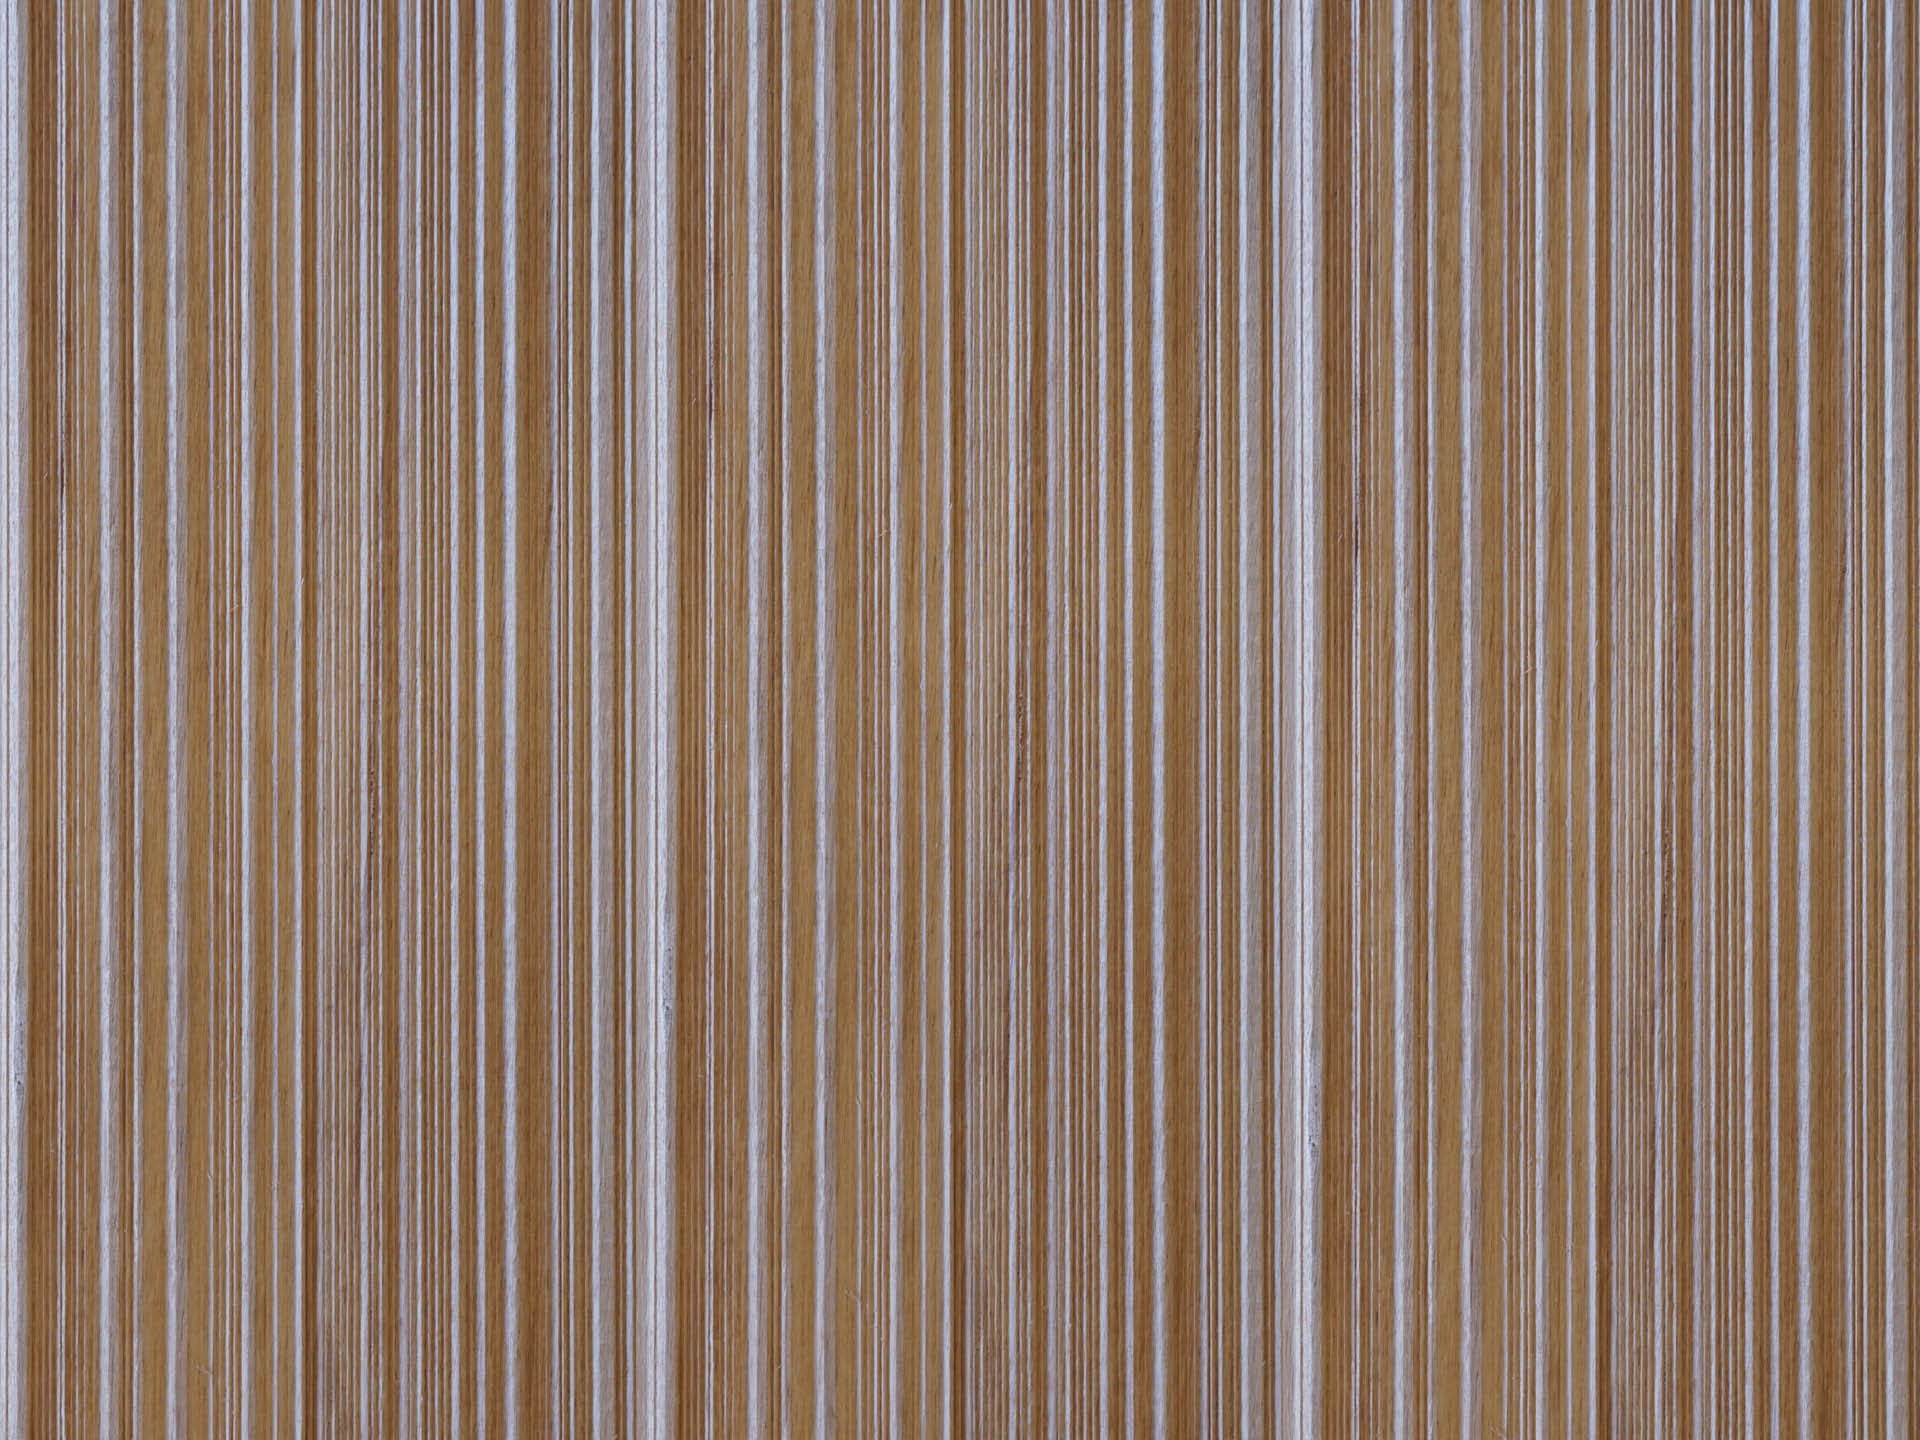 Side by side close up of Weldtex tongue & groove alder hardwood plank consisting of a combed, striated, brushed wood appearance common in mid-century modern homes and design